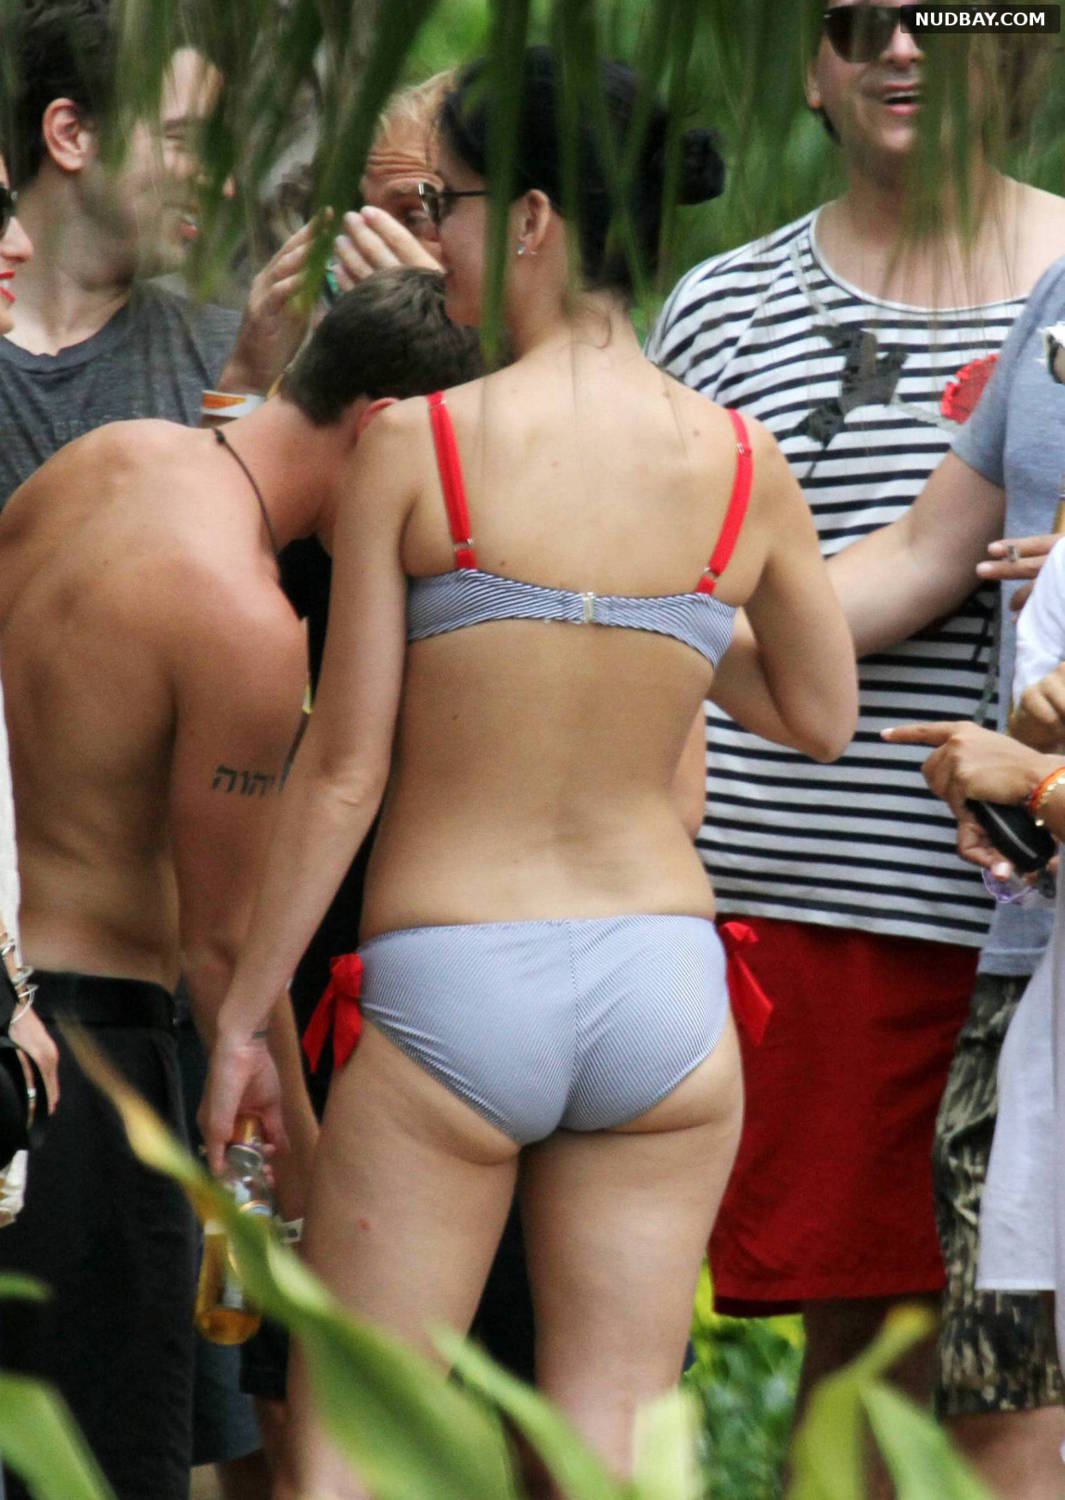 Katy Perry Ass in bikini with friends at Atlantis Paradise Island July 18 2010